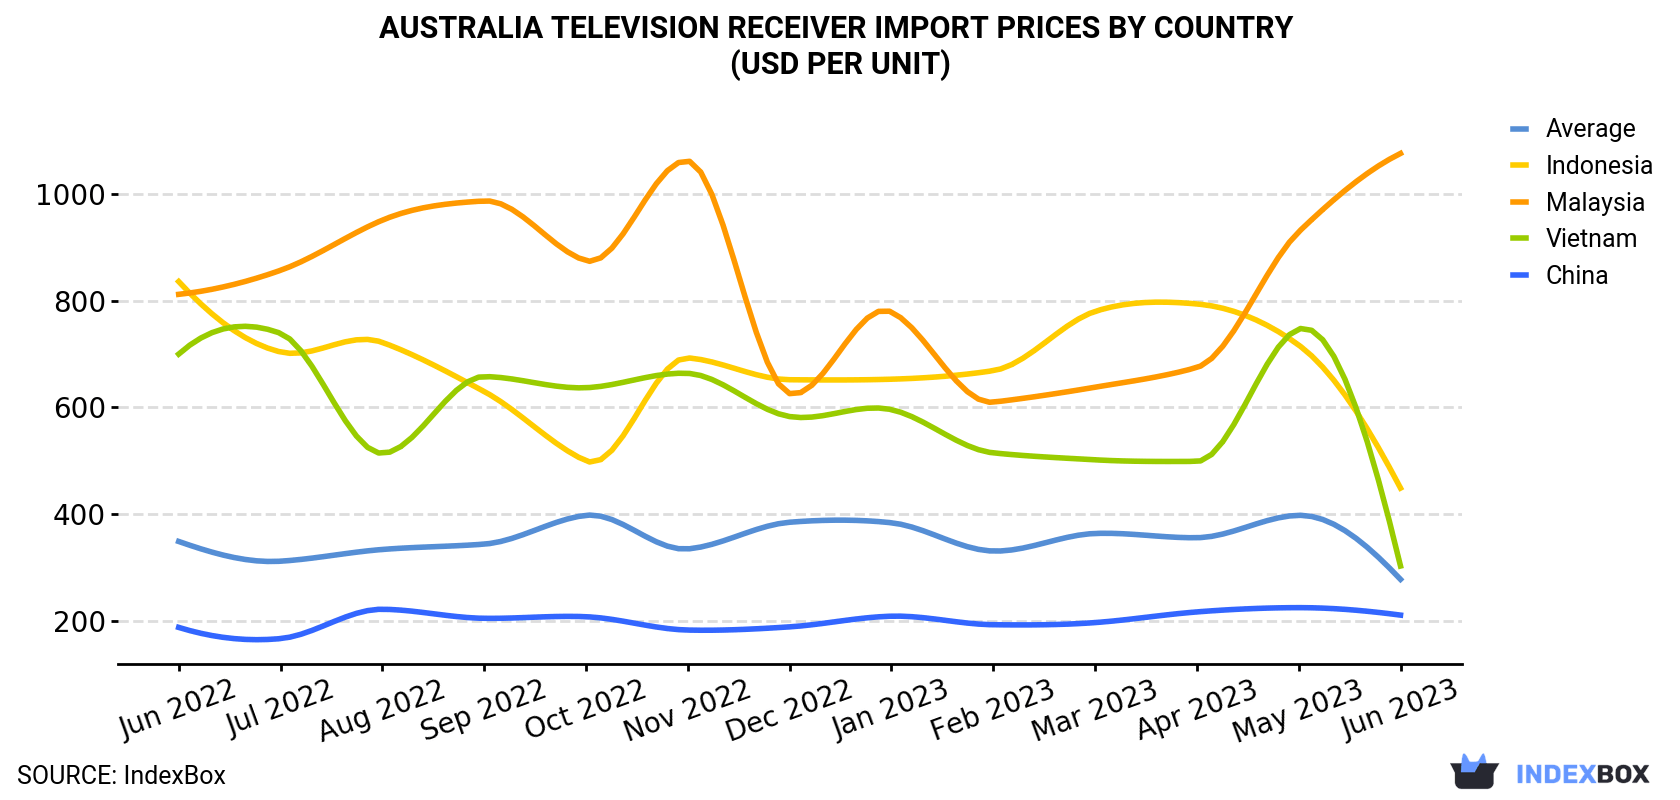 Australia Television Receiver Import Prices By Country (USD Per Unit)